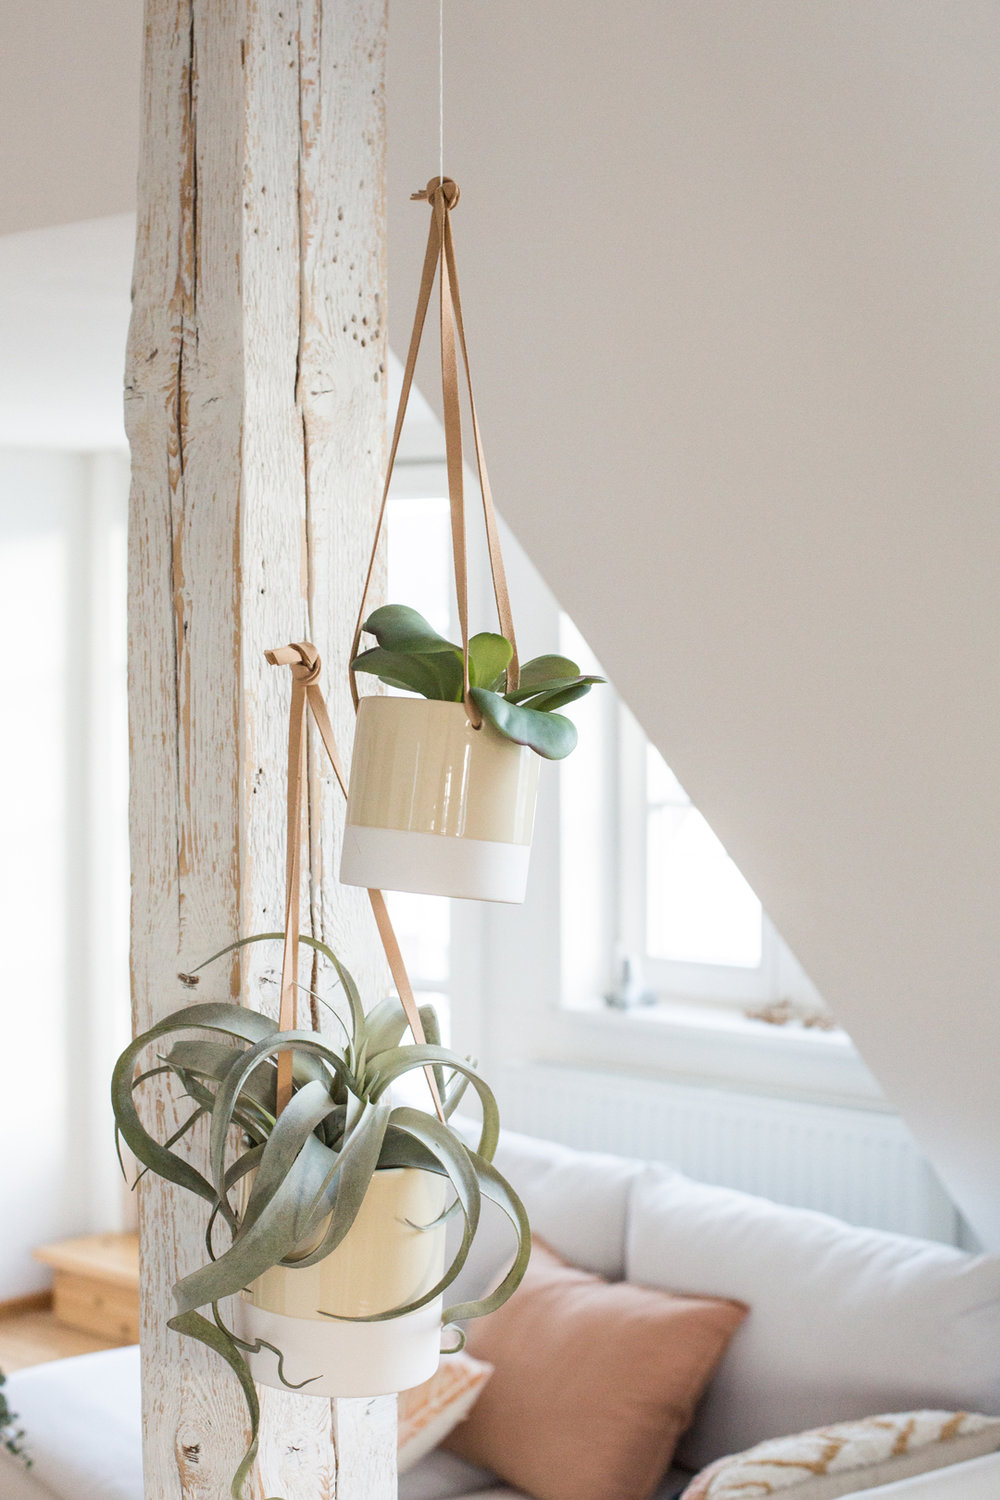 Faux leather straps with ceramic pots to hang for the Urban Jungle